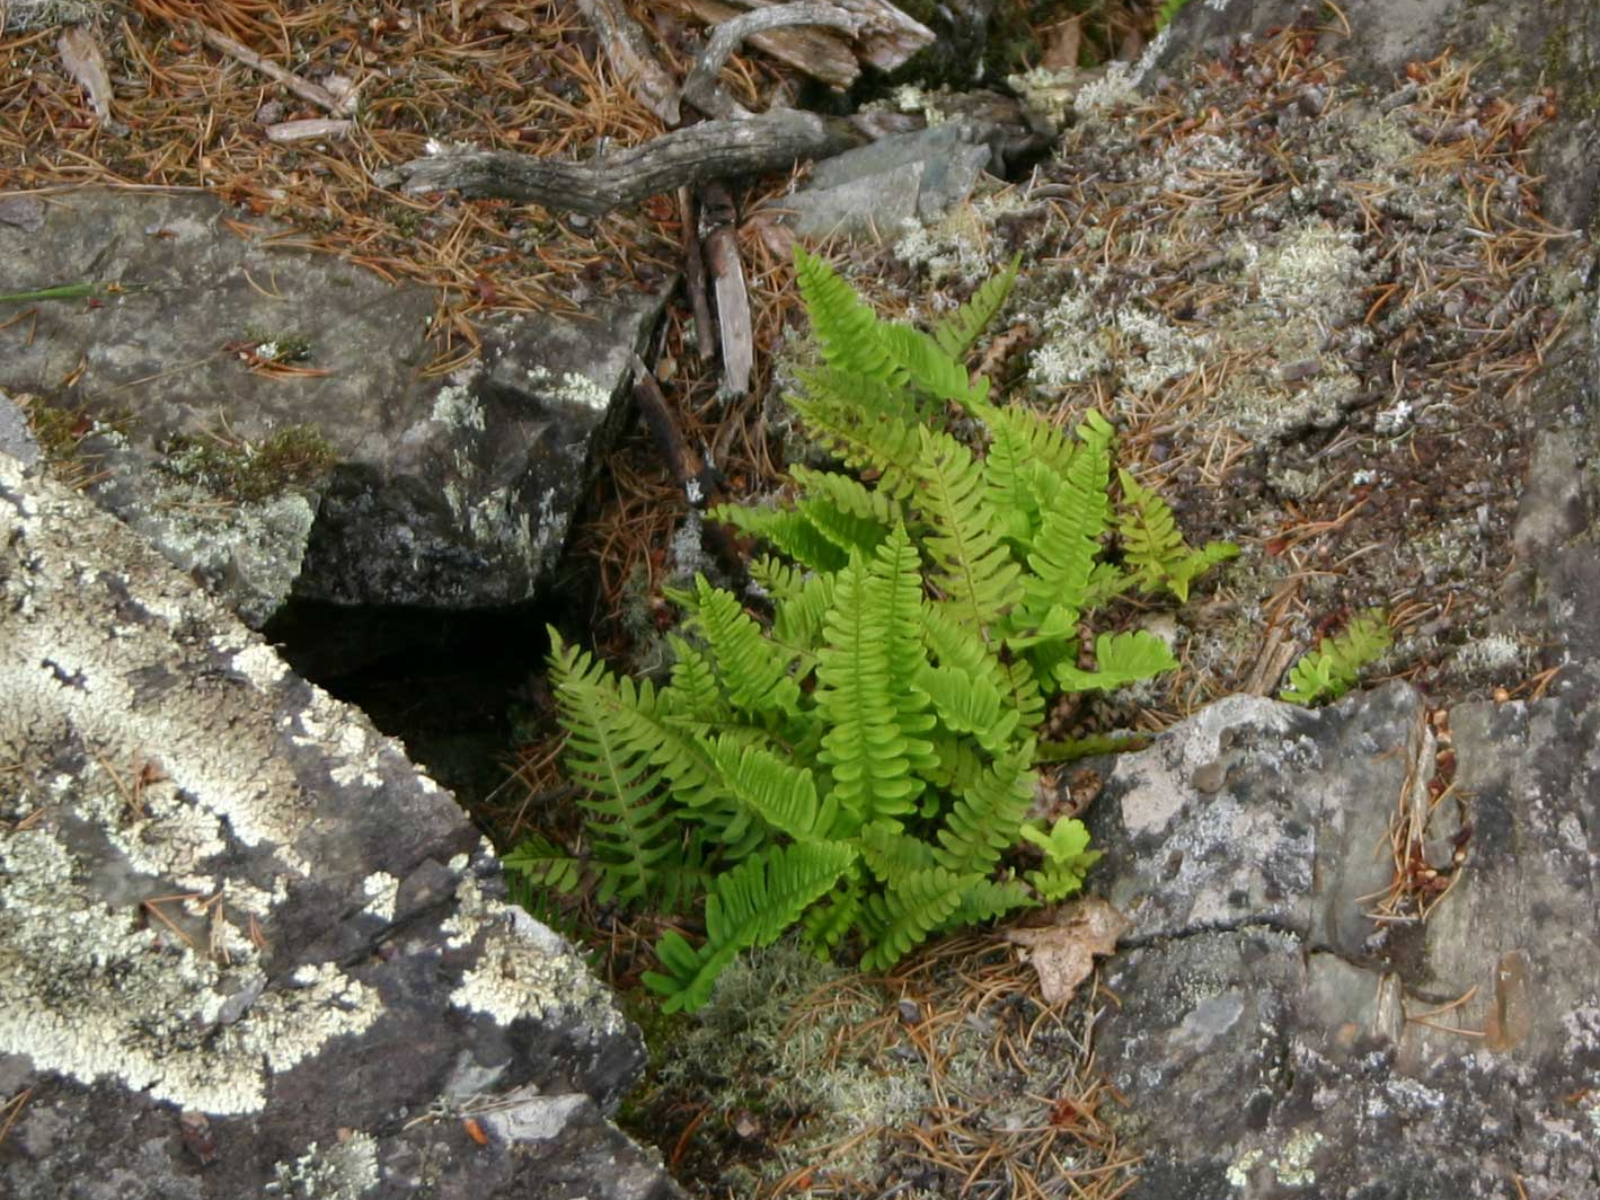 Close-up on a leafy green fern growing in the cleft of a rock.